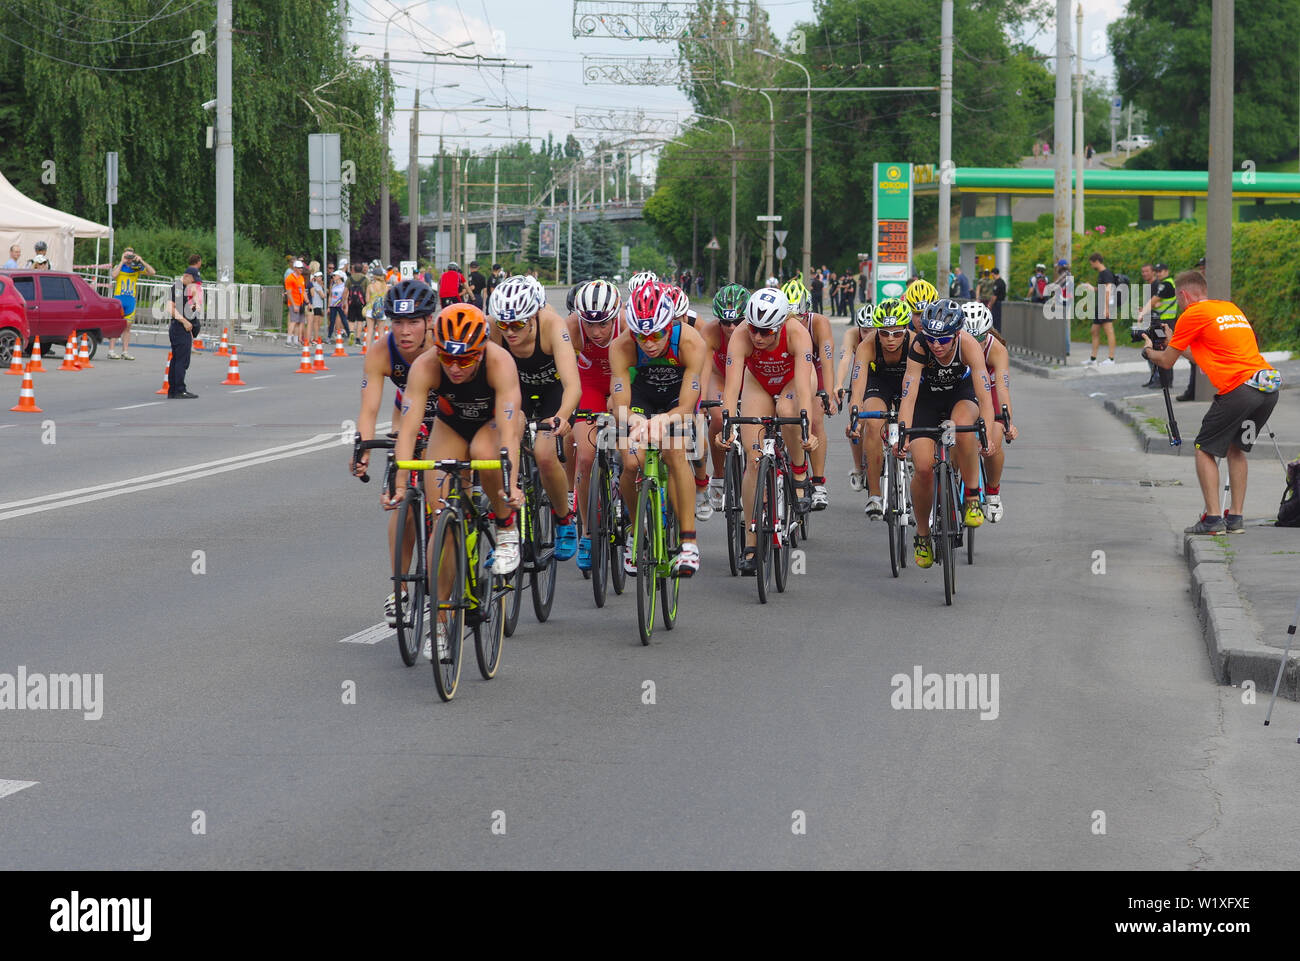 DNIPRO, UKRAINE - JUNE 08, 2019: Group of female athletes on a bicycle section on a city street during of the '2019 Dnipro ETU Sprint Triathlon Europe Stock Photo